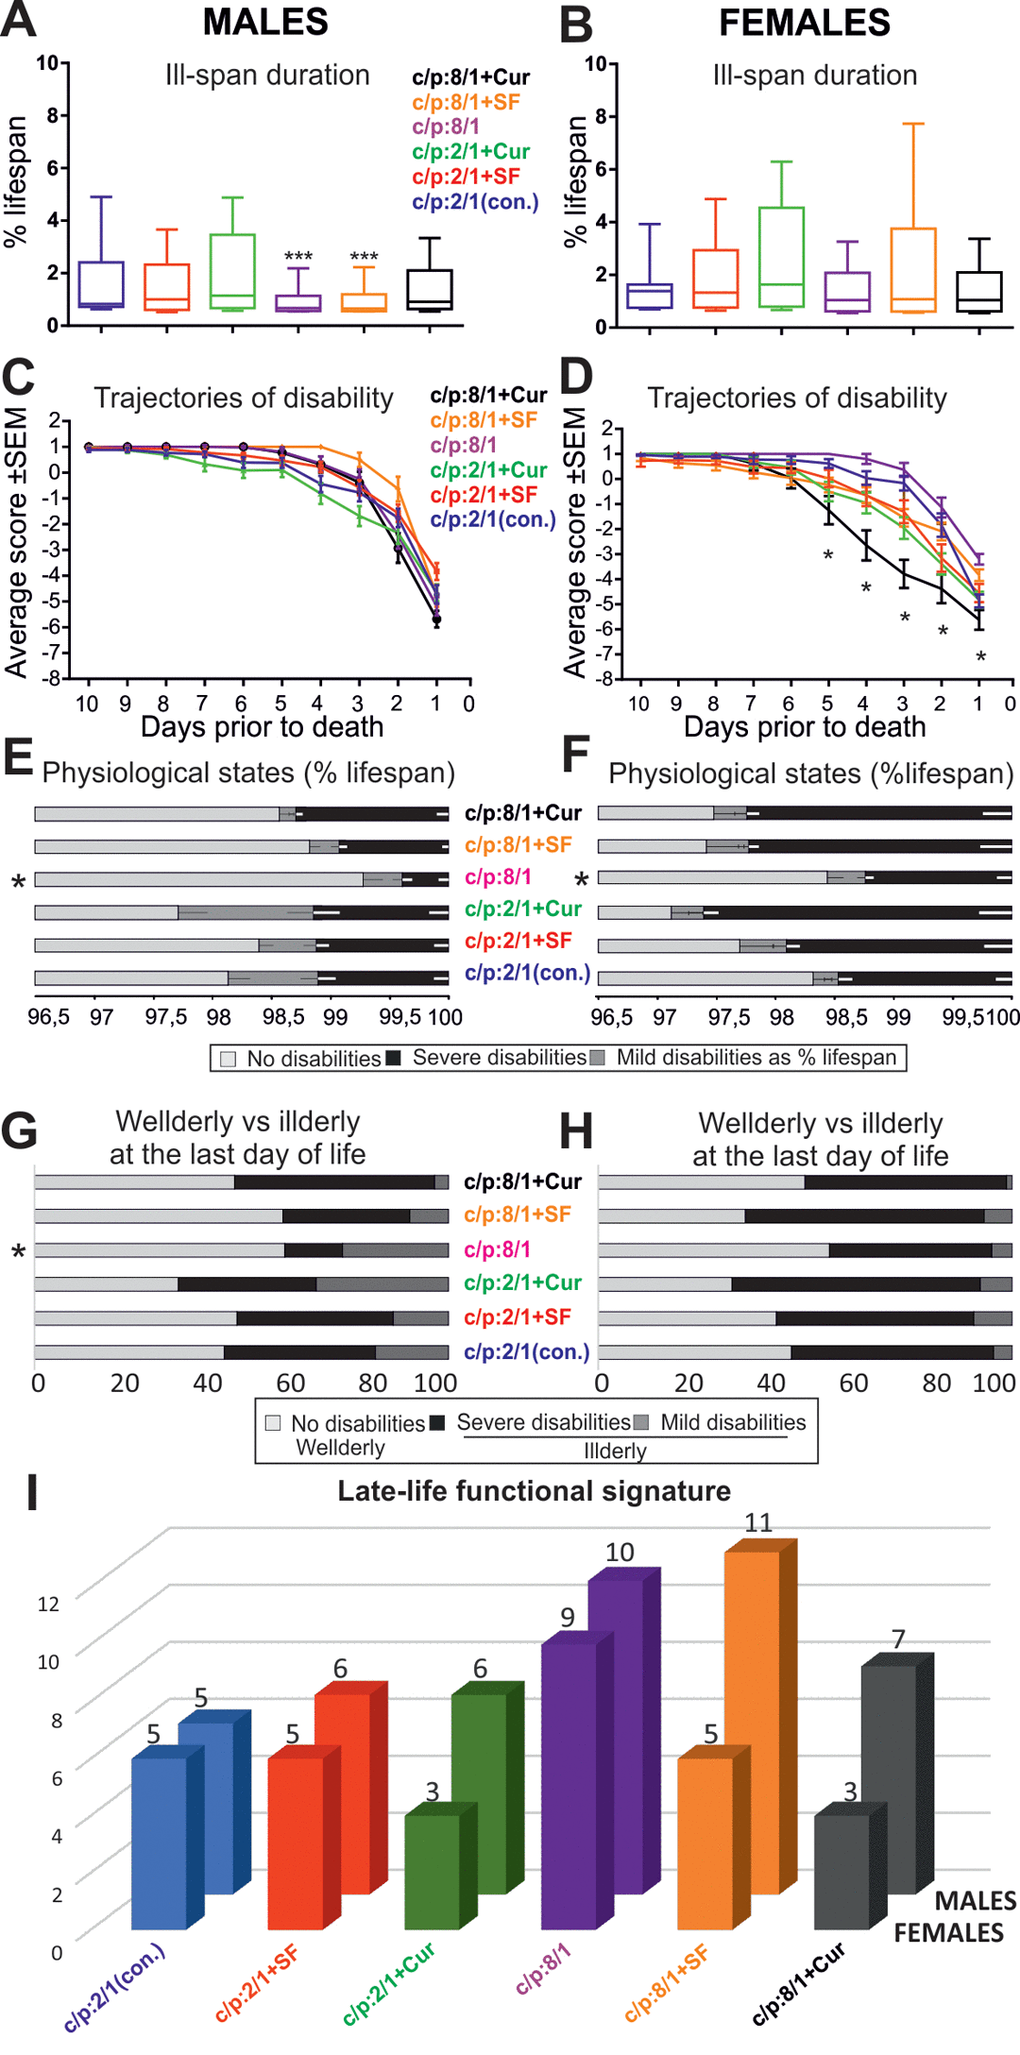 Dietary interventions can change late-life quality substantially. (A, B) Box plots depict ill-span duration for all 6 male (A) and all 6 female (B) populations raised on different diets. *** indicates statistical significance with p C, D) Average disability scores of illderly flies plotted over the last 10 days of life for all 6 male (C) and all 6 female (D) populations. ** indicates statistical significance (p (E, F) Duration of health-span (light gray bars), mild/moderate ill-span (dark gray bars), and severe/complete ill-span (black bars), as a percentage of lifespan are plotted for each diet and separately for males (E) and females (F). * indicates statistically significant difference (Kruskal Wallis ANOVA with Dunn’s posthoc testing (G, H). The relative percentages of animals without impairments (light gray bars), with mild impairments (medium gray bars) and with severe impairments (dark gray bars) during the last day of life plotted separately for each diet and males (G) and females (H). * indicates statistically significant differences (p I) The cumulative startle response score through the last ten days of life (late-life functional signature) plotted for each diet (color coded) and separately for females (front row) and males (back row).